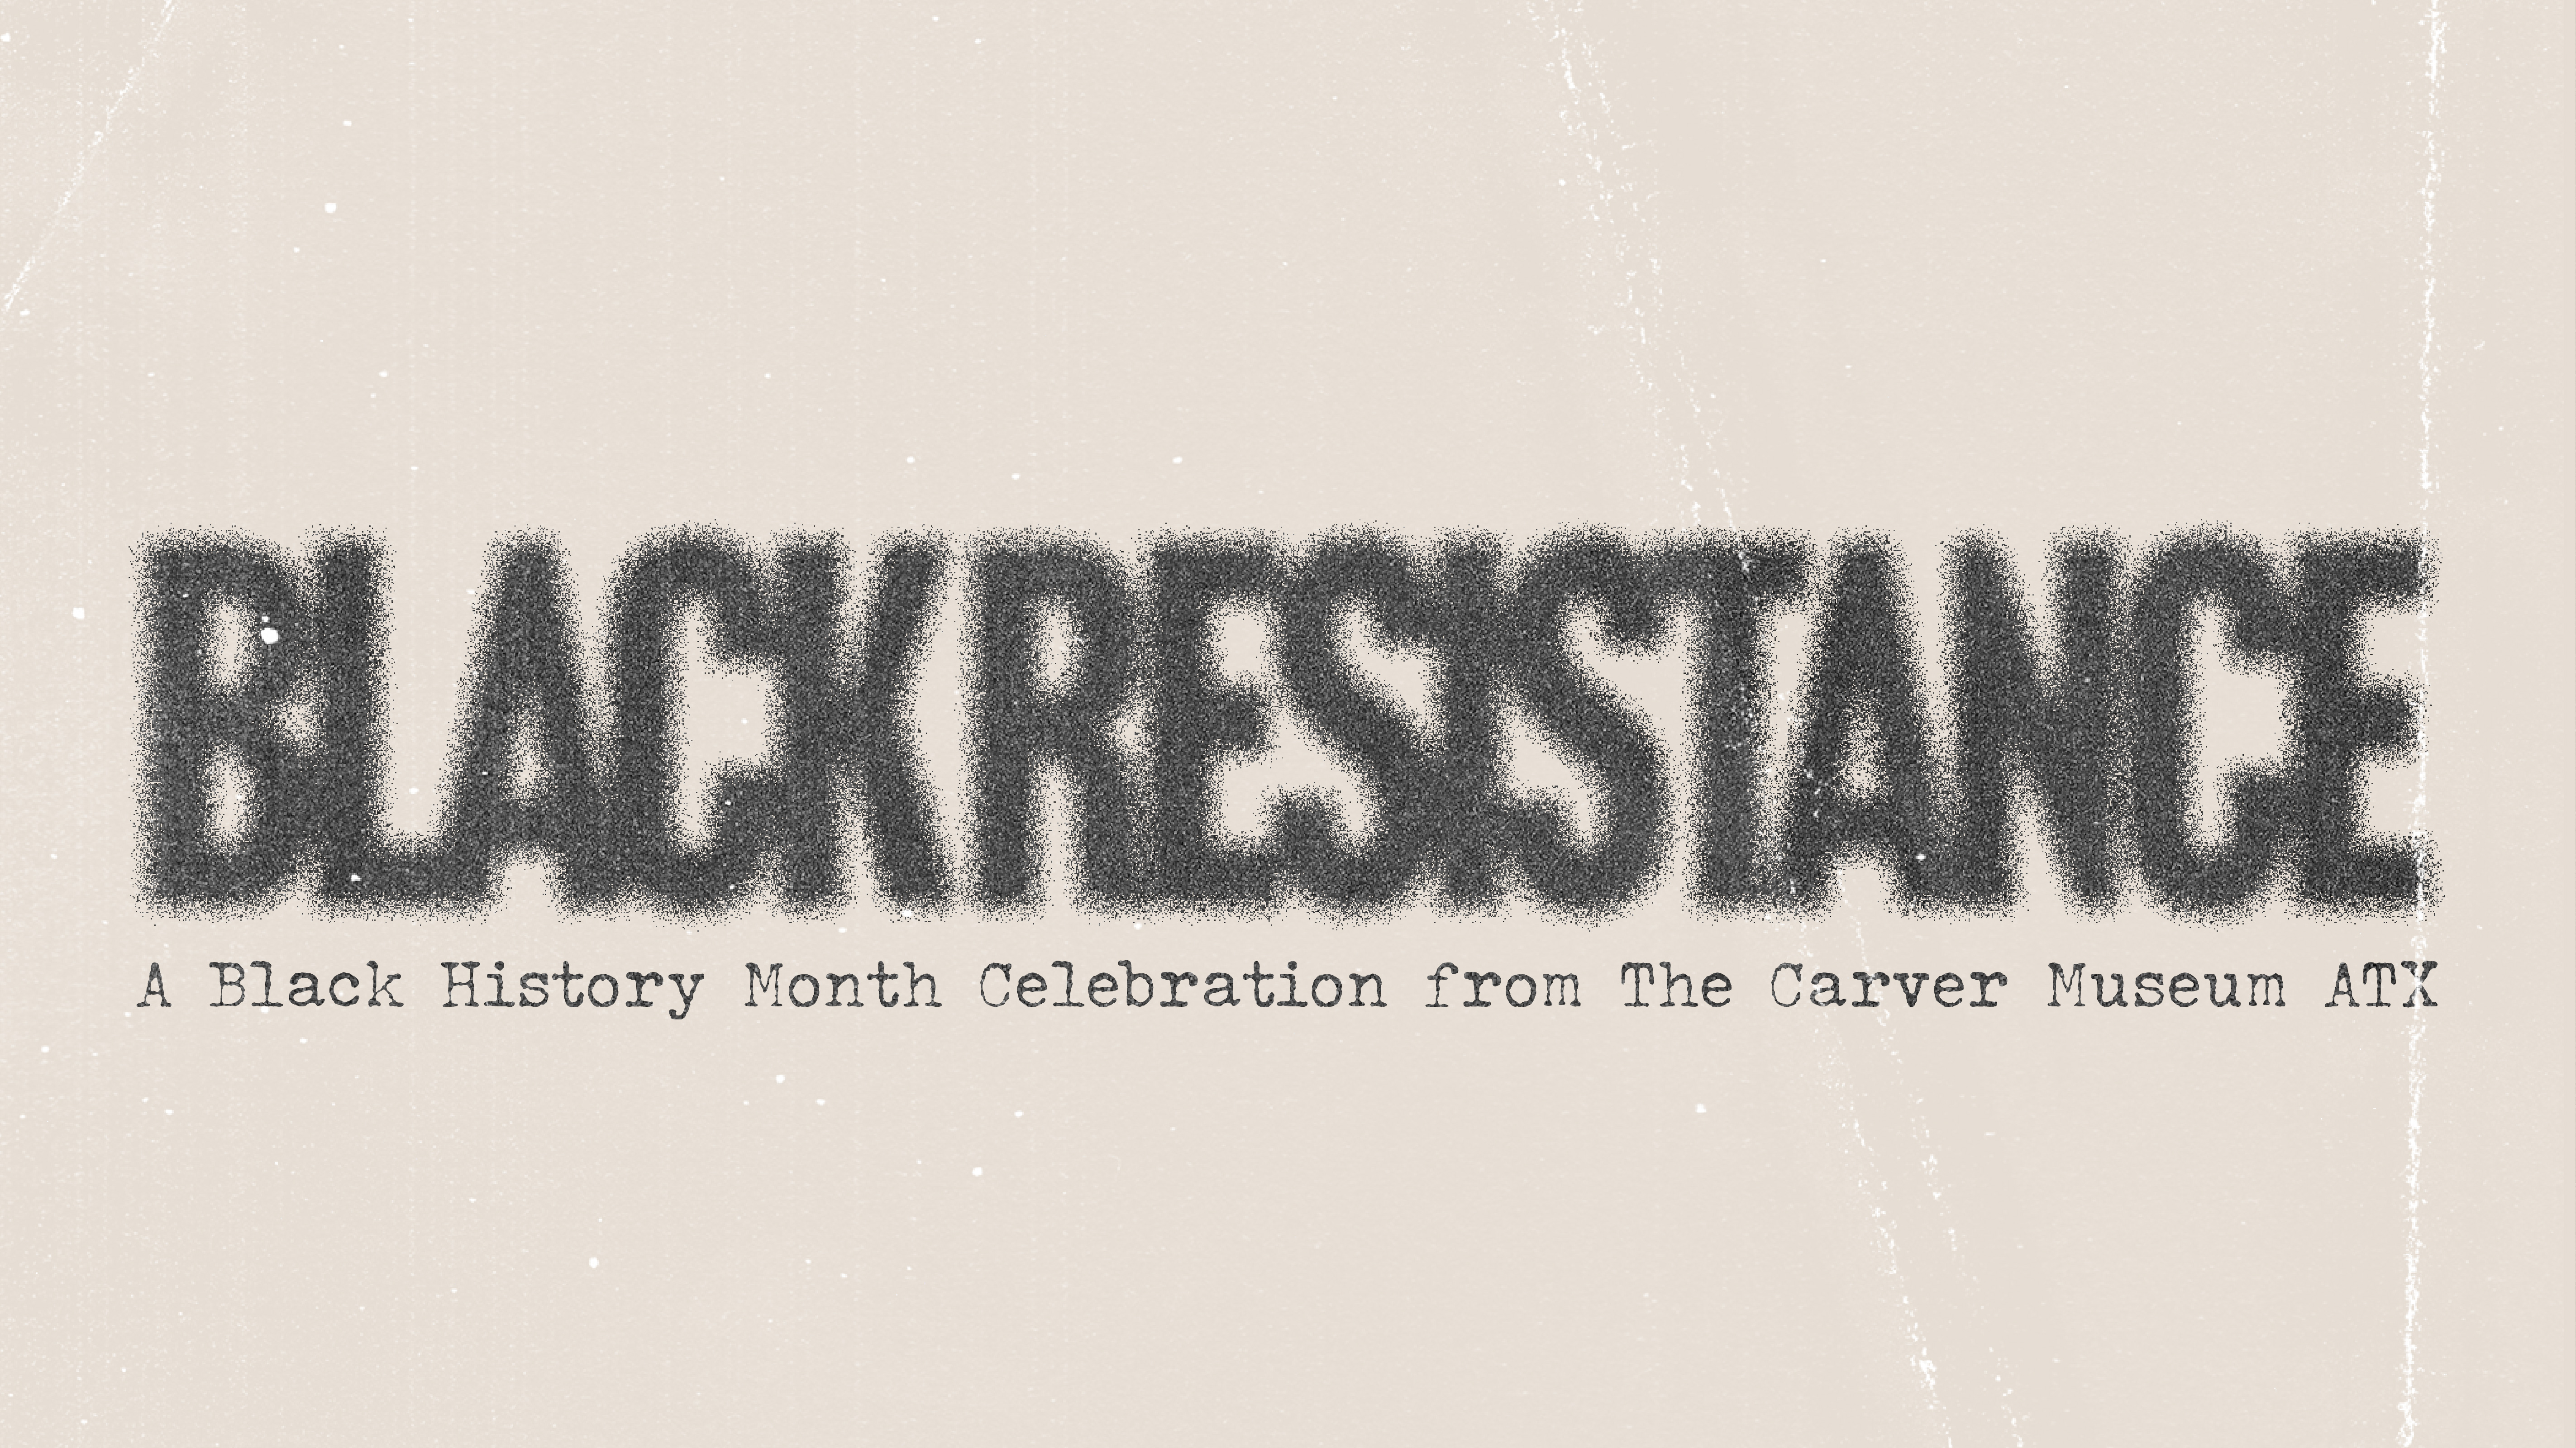 Carver Museum's Black History Month